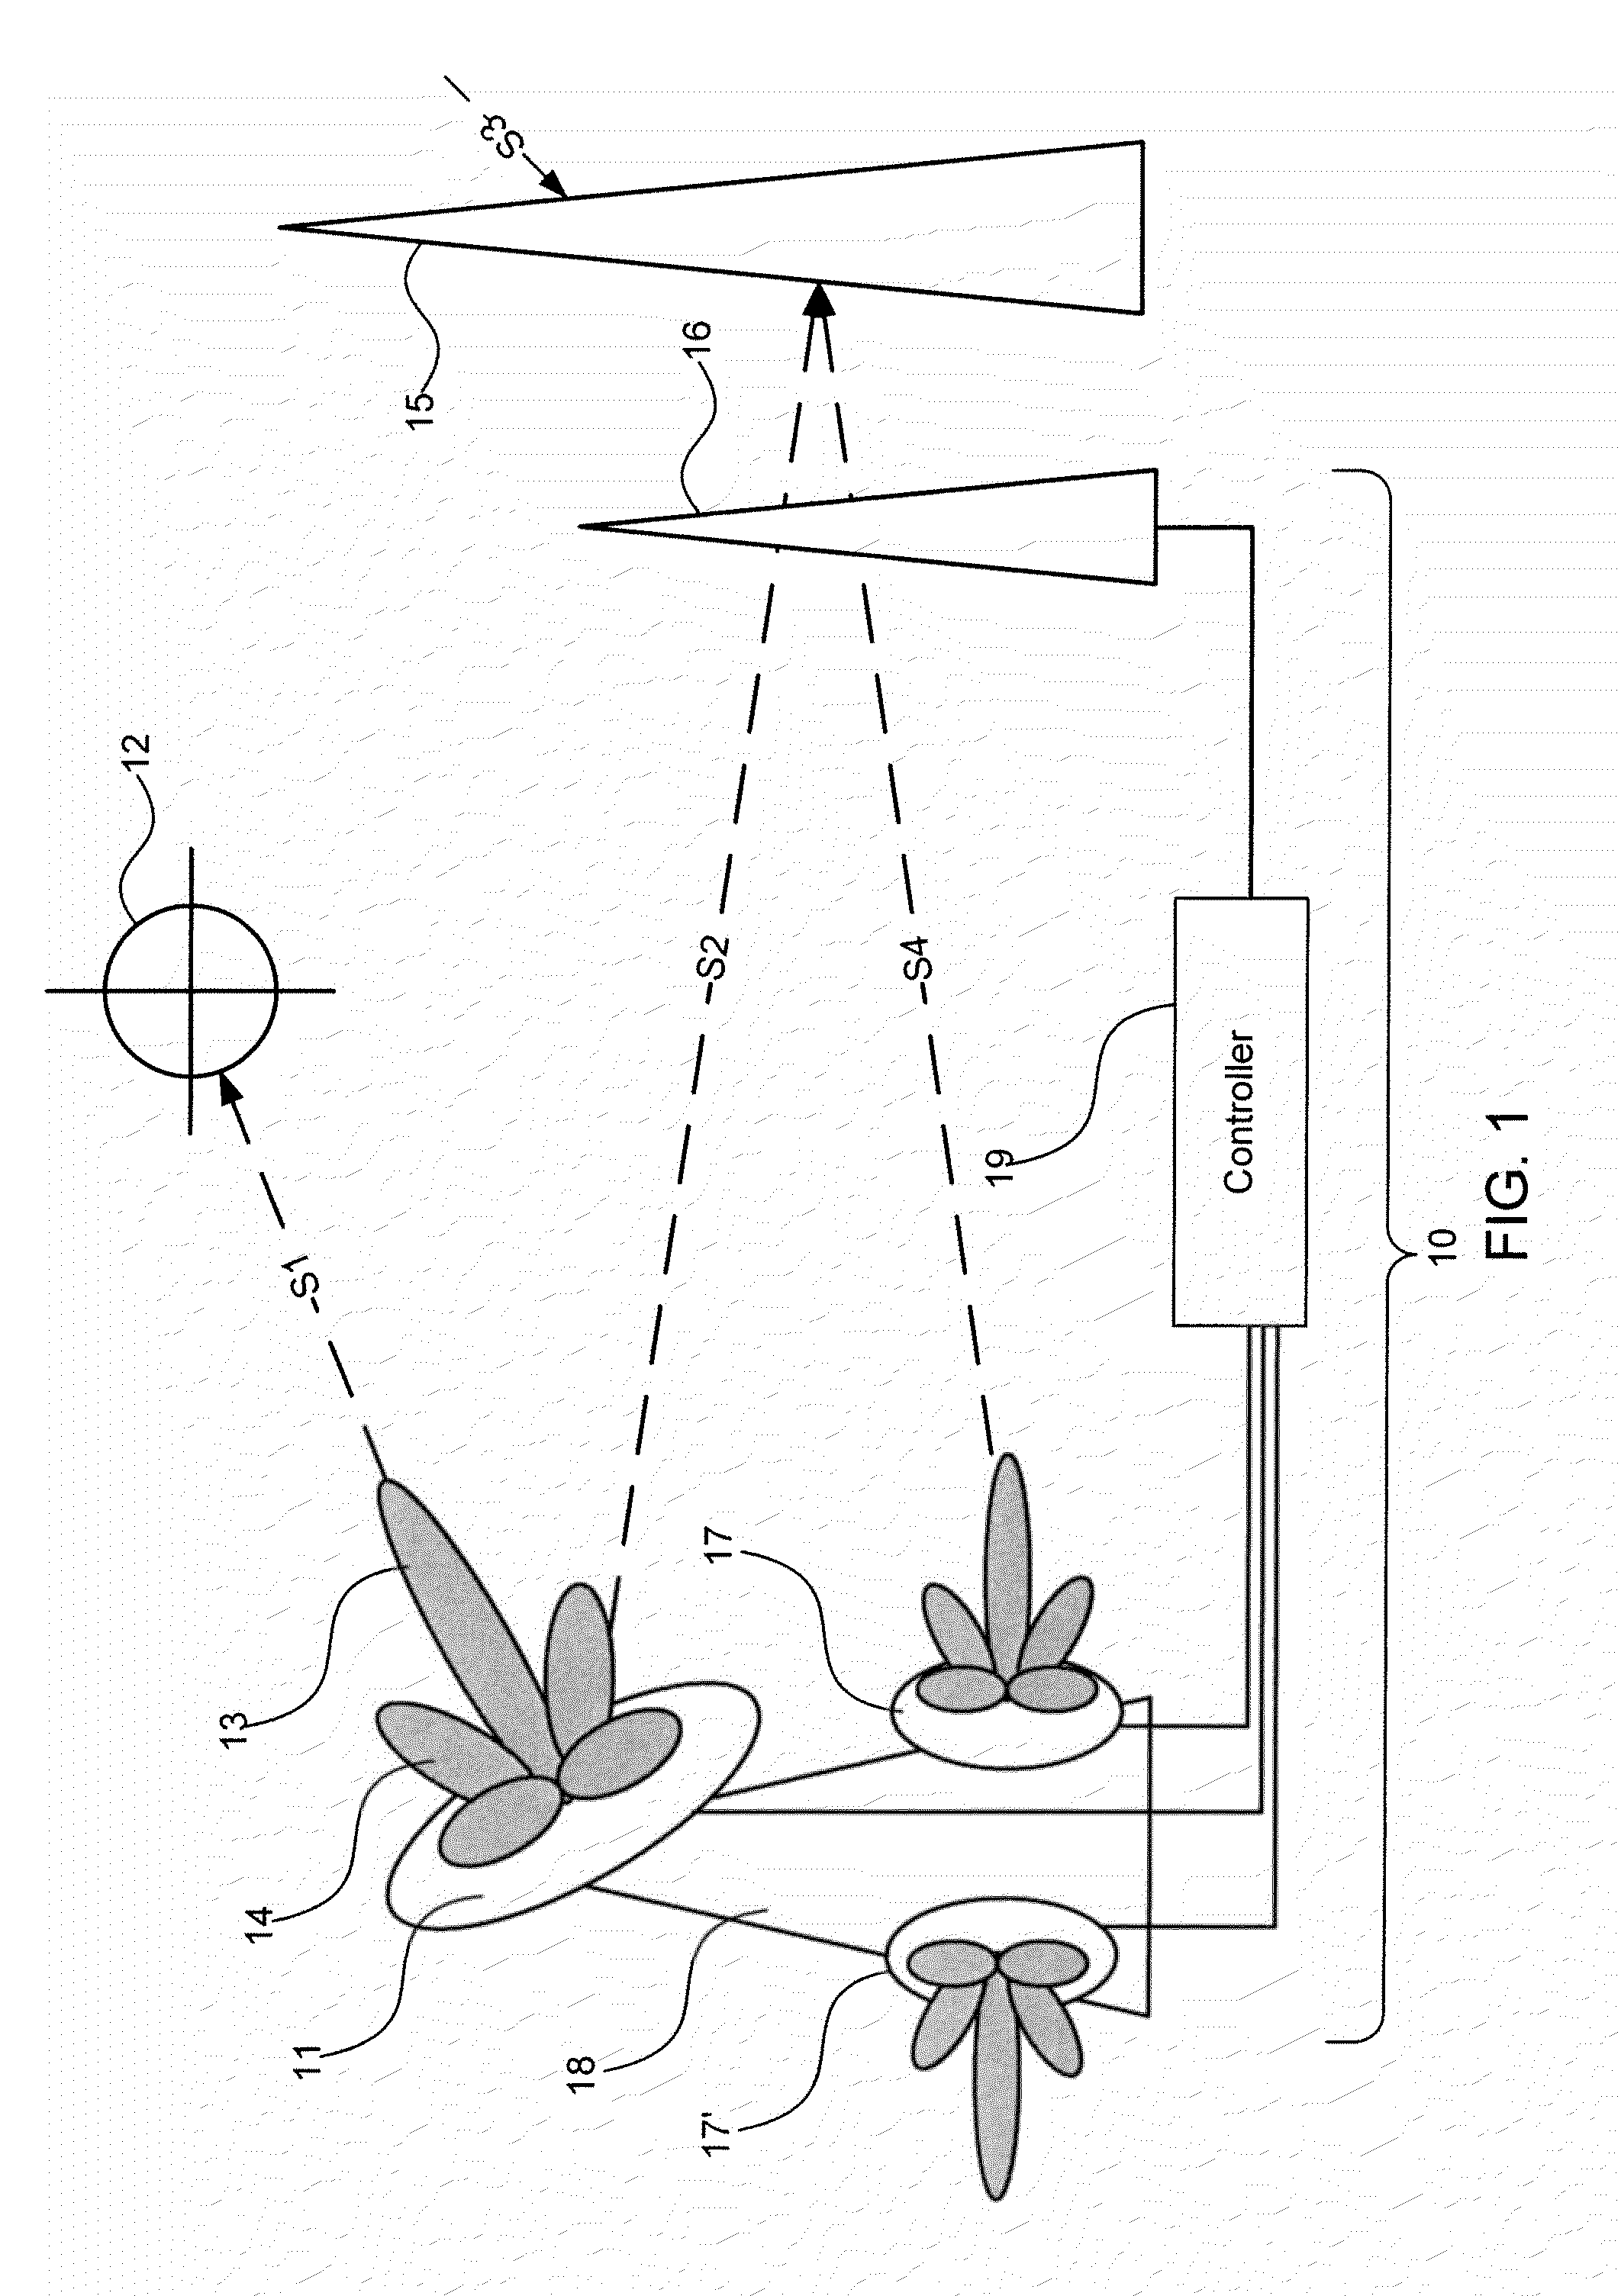 Systems and methods for protecting a receiving antenna from interference by a transmitting antenna